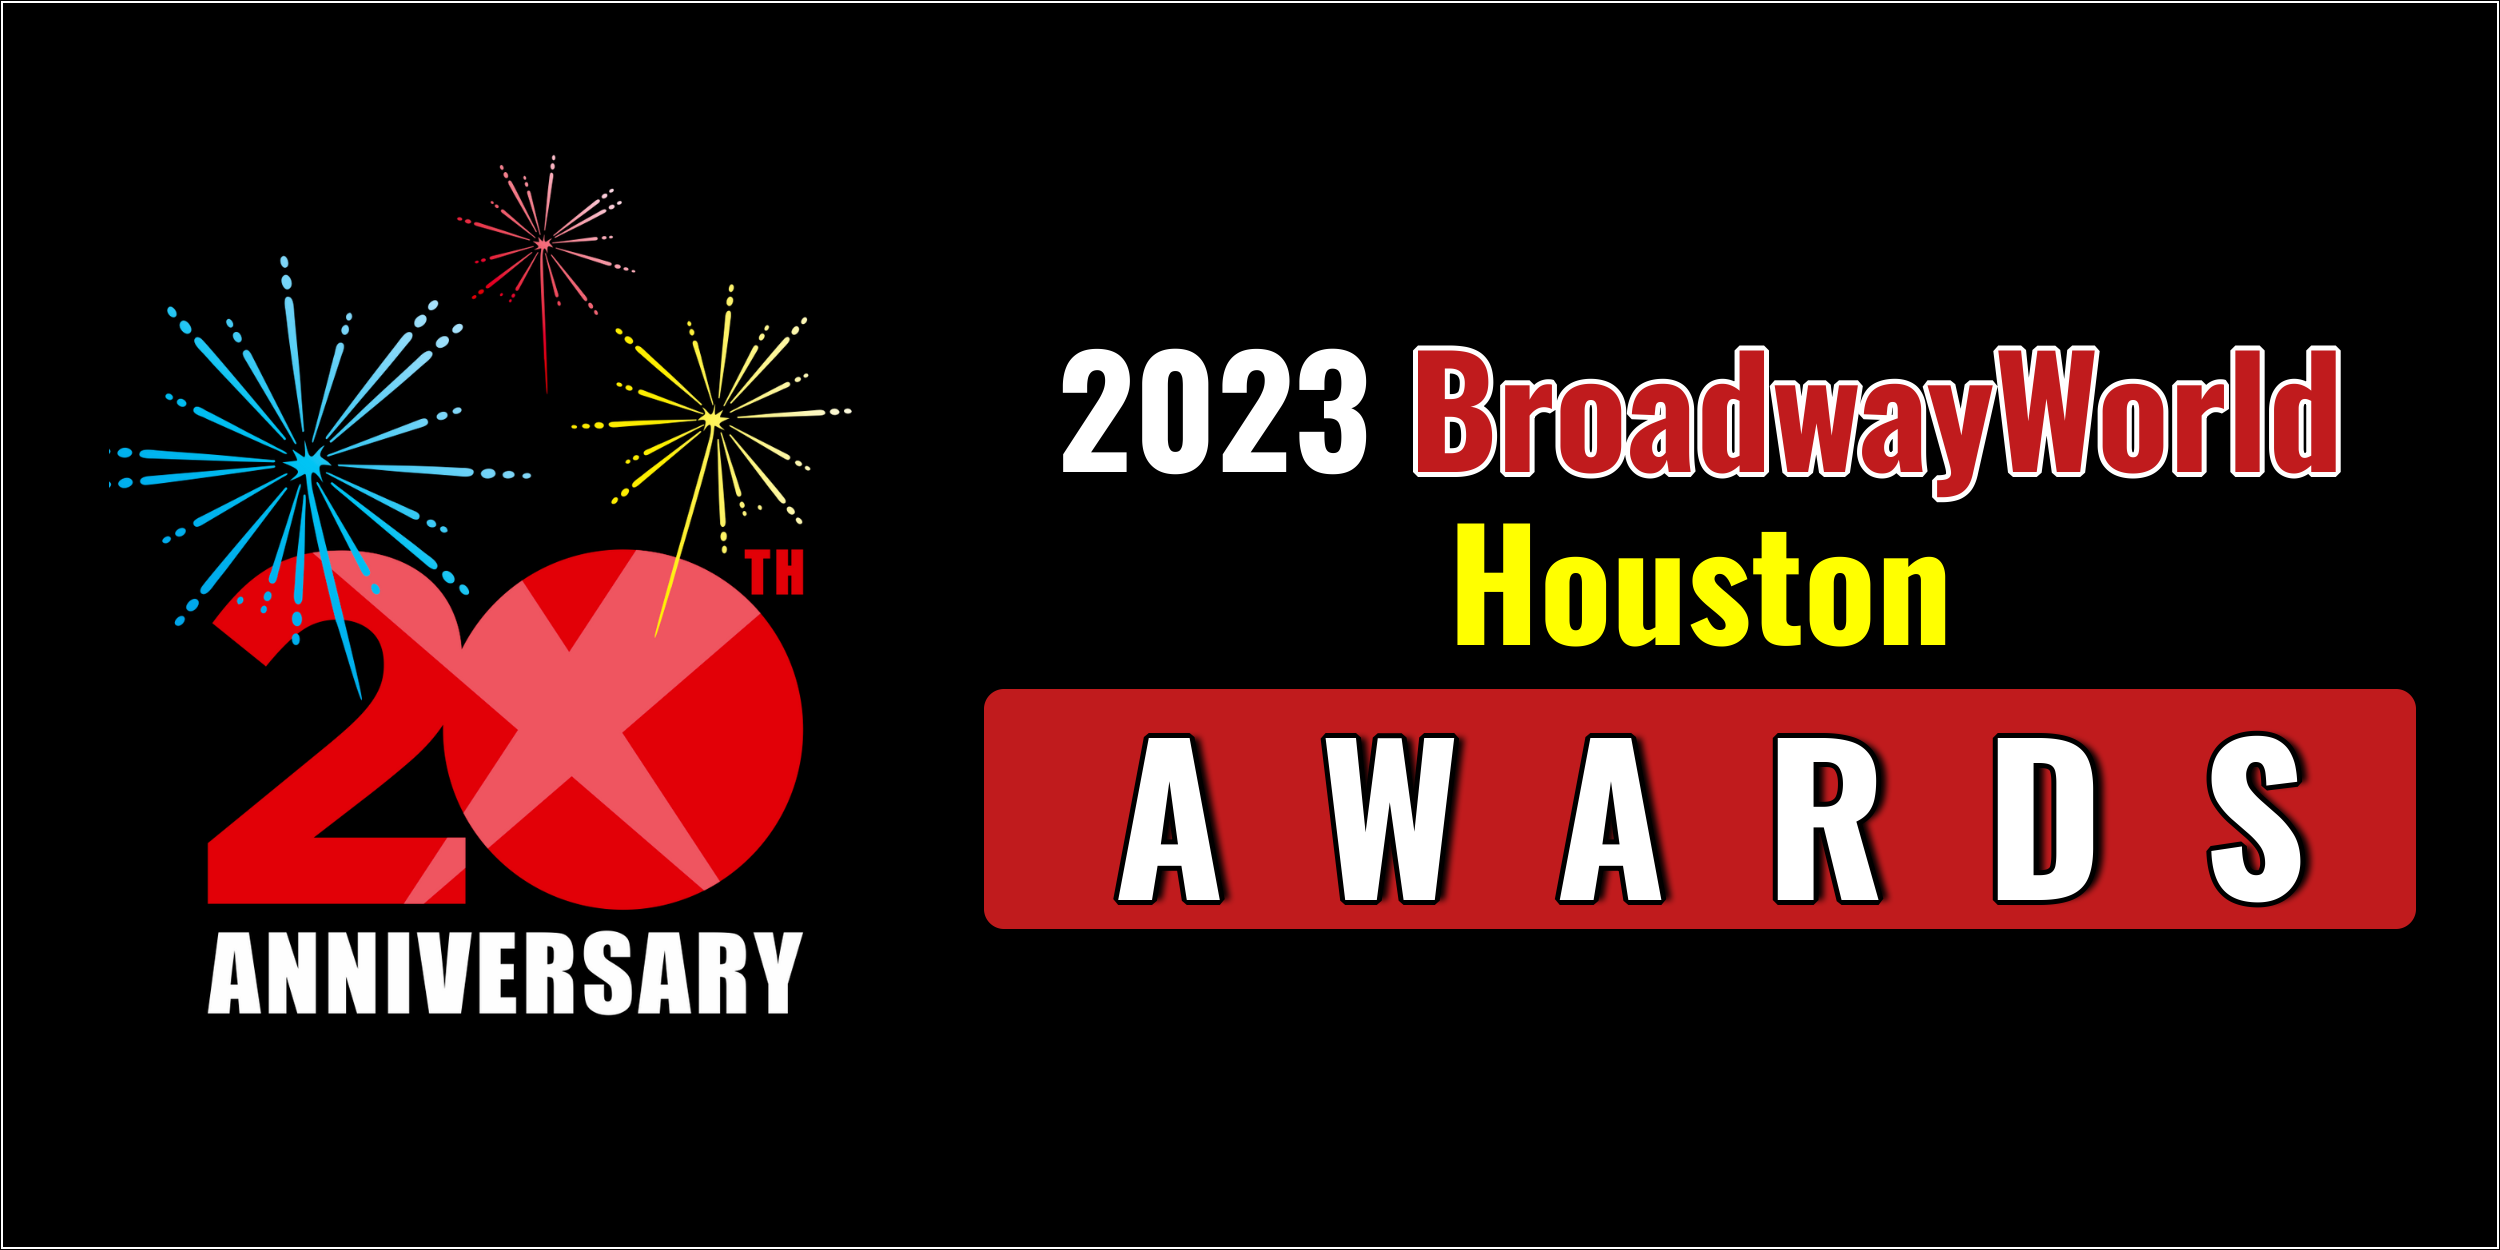 Latest Standings Announced For The 2023 BroadwayWorld Houston Awards; THE OLDEST BOY Leads Best Play! 